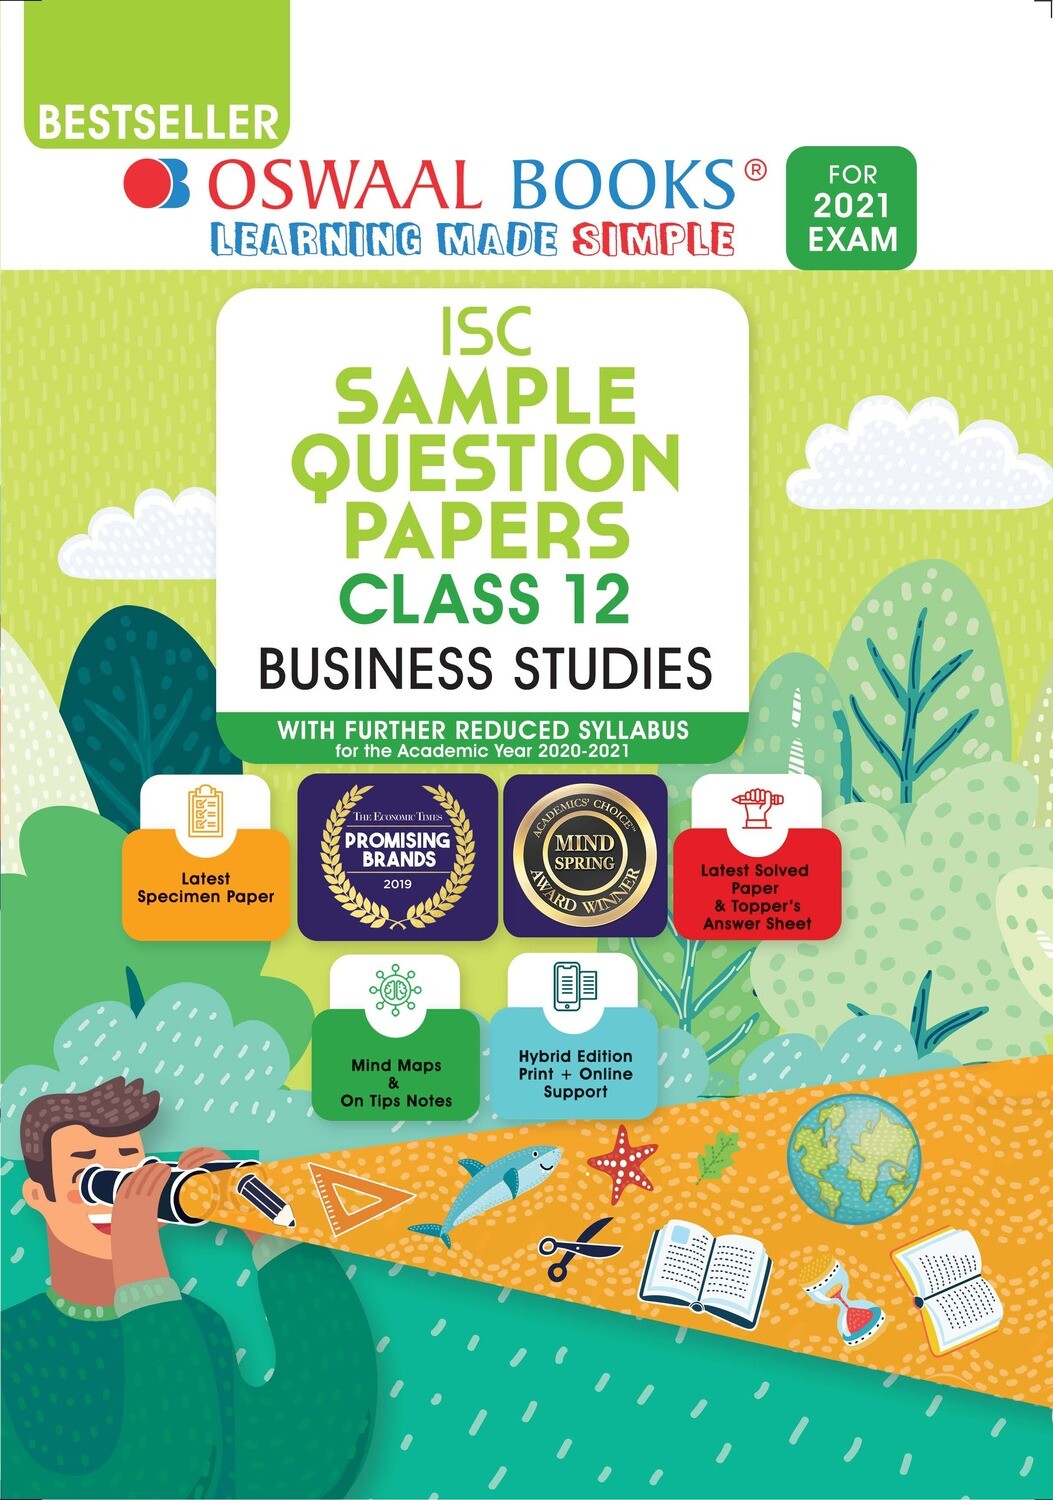 Buy e-book: Oswaal ISC Sample Question Papers Class 12 Business Studies (For 2021 Exam)